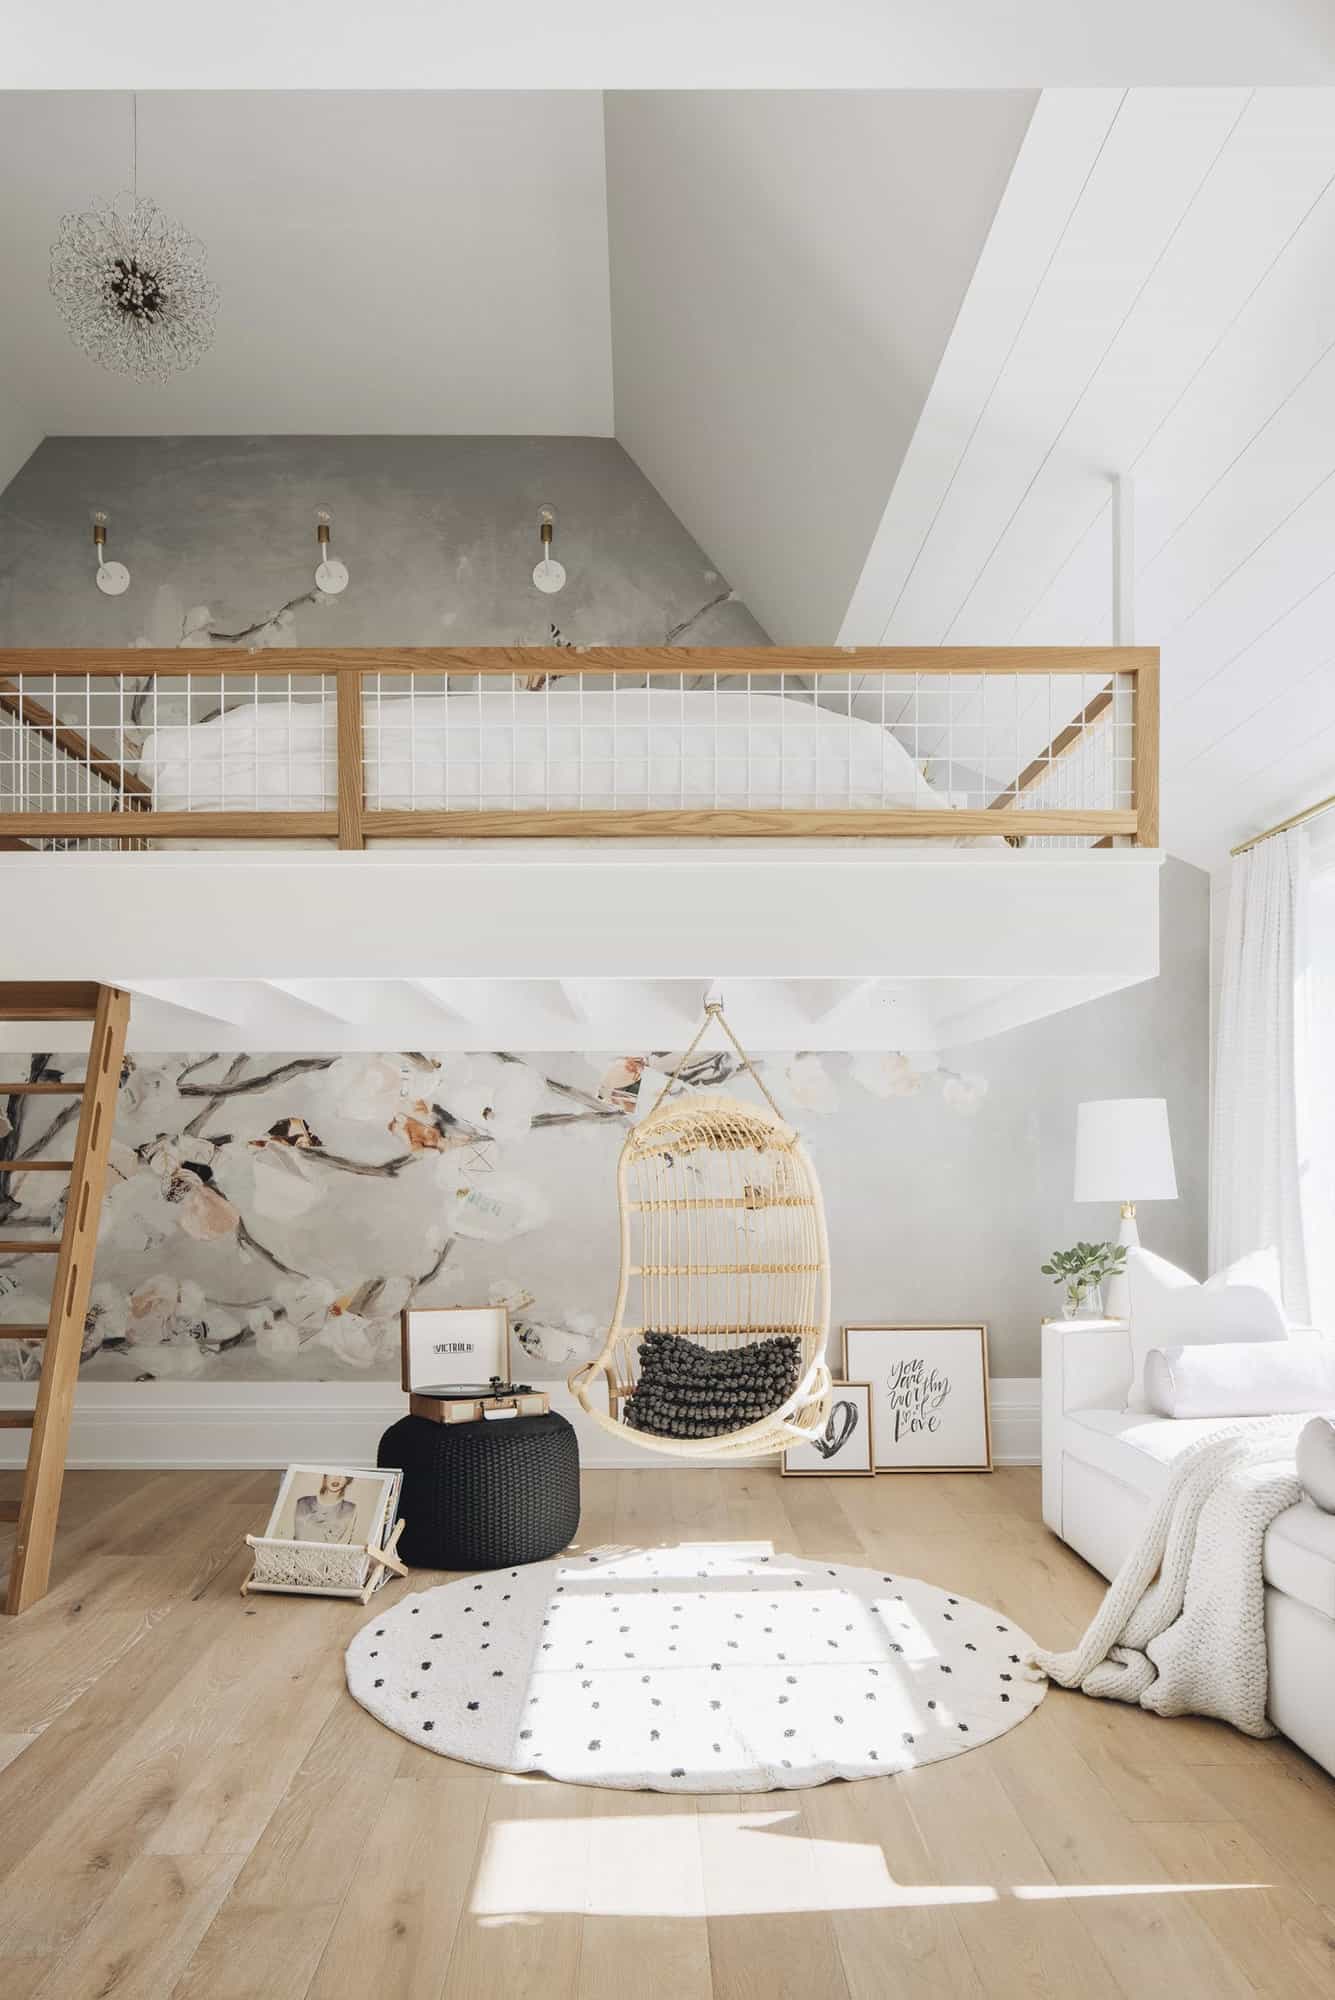   transitional-style-teenager-bedroom-with-a-loft